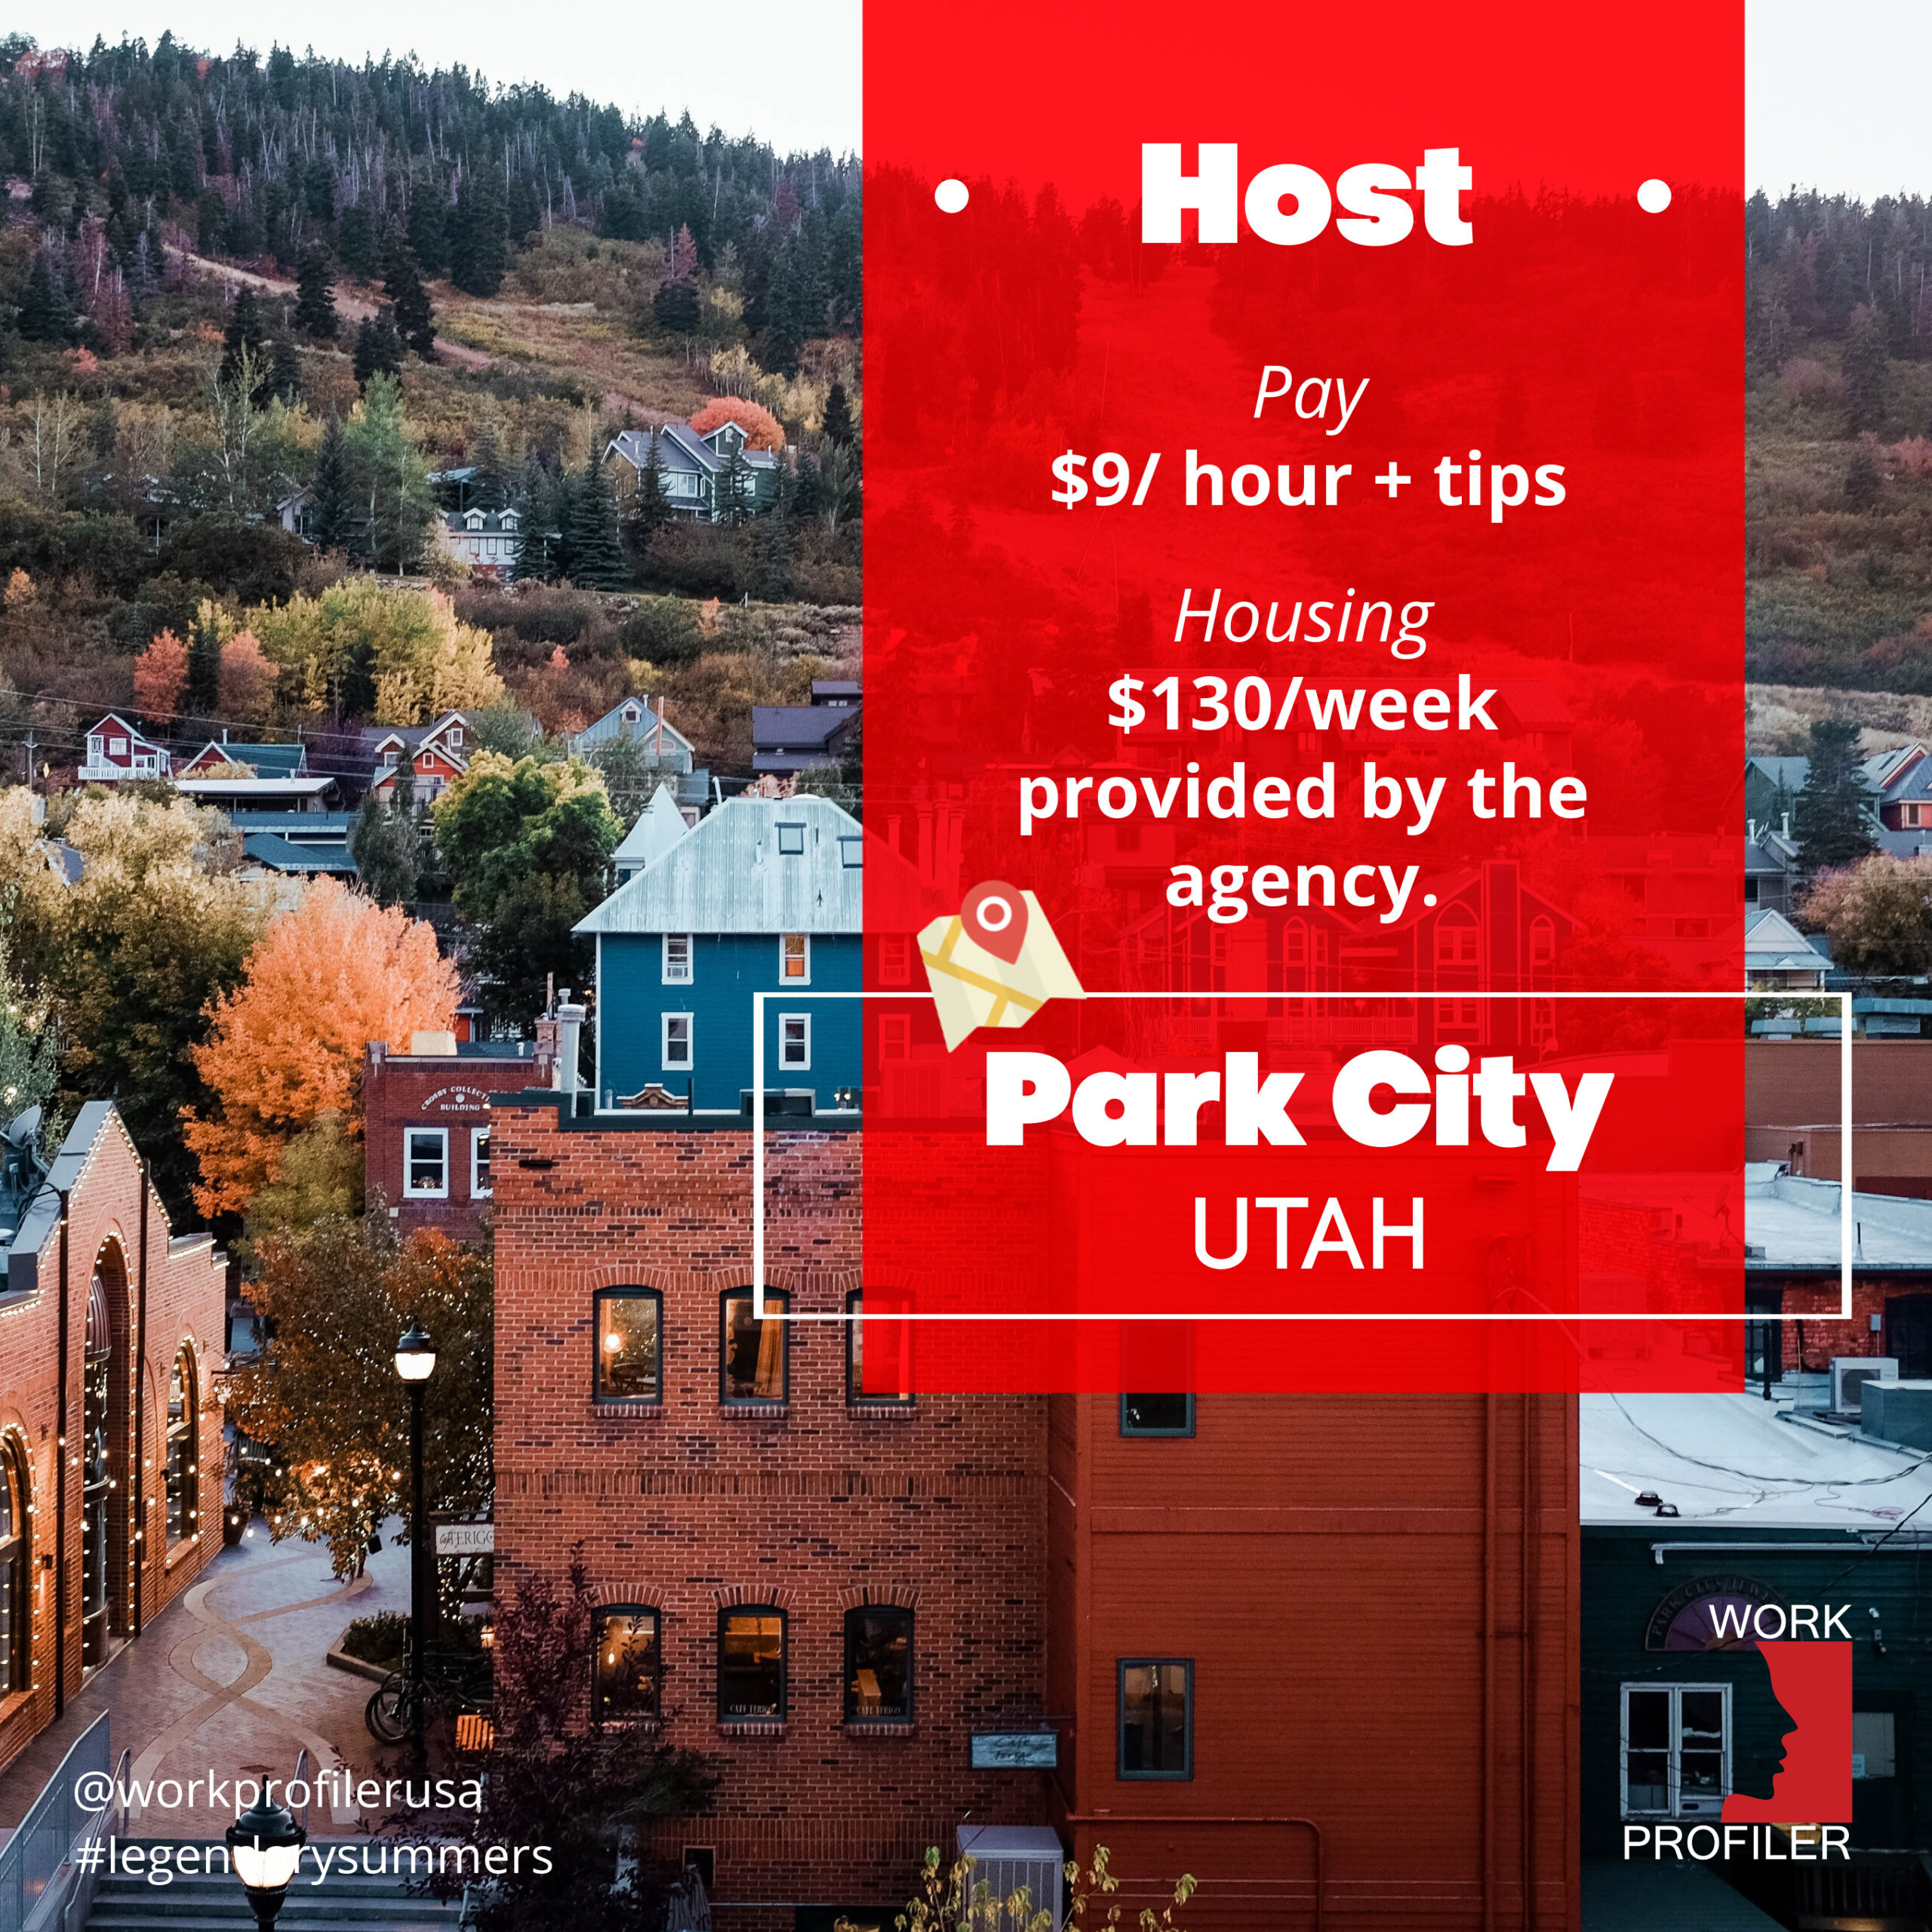 A red poster with black text advertising a summer job opportunity in Park City, Utah. The poster mentions pay of $9 per hour and tips, as well as housing provided by the agency